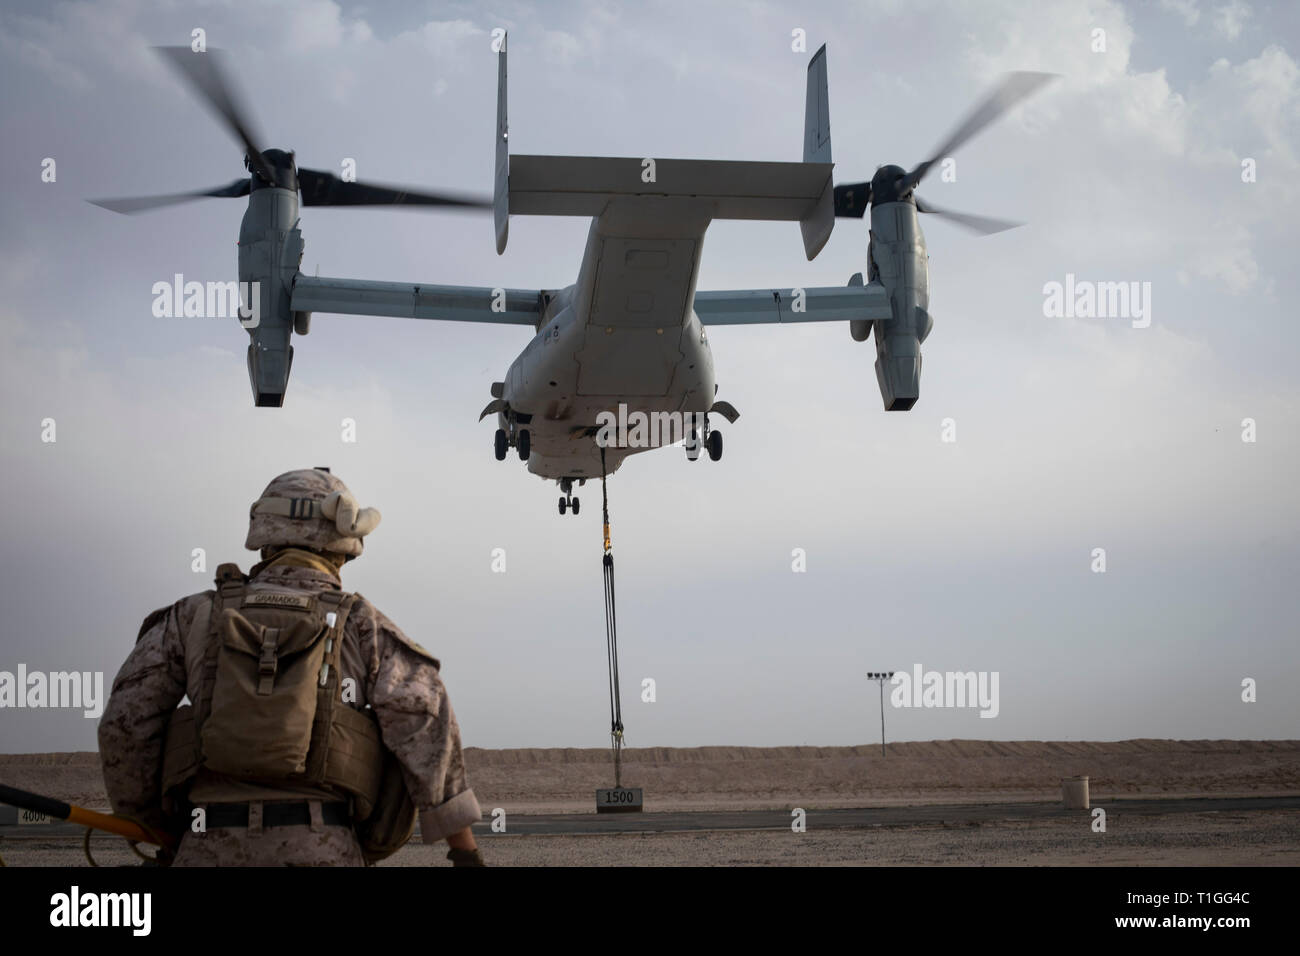 U.S. Marine Corps Cpl. Michael Granados, a landing support specialist with Combat Logistics Detachment 34, attached Special Purpose Marine Air Ground Task Force Crisis Response-Central Command, watches as an MV-22 Osprey carries a 1,500-pound load during a Helicopter Support Team exercise in support of Marine Medium Tiltrotor Squadron 264, also attached to SPMAGTF-CR-CC, in Southwest Asia, March 20, 2019. The HST exercise provides proficiency training to landing support specialists with CLD 34 and VMM-264 pilots in the insertion and extraction of assets in restrictive terrain. (U.S. Marine Cor Stock Photo